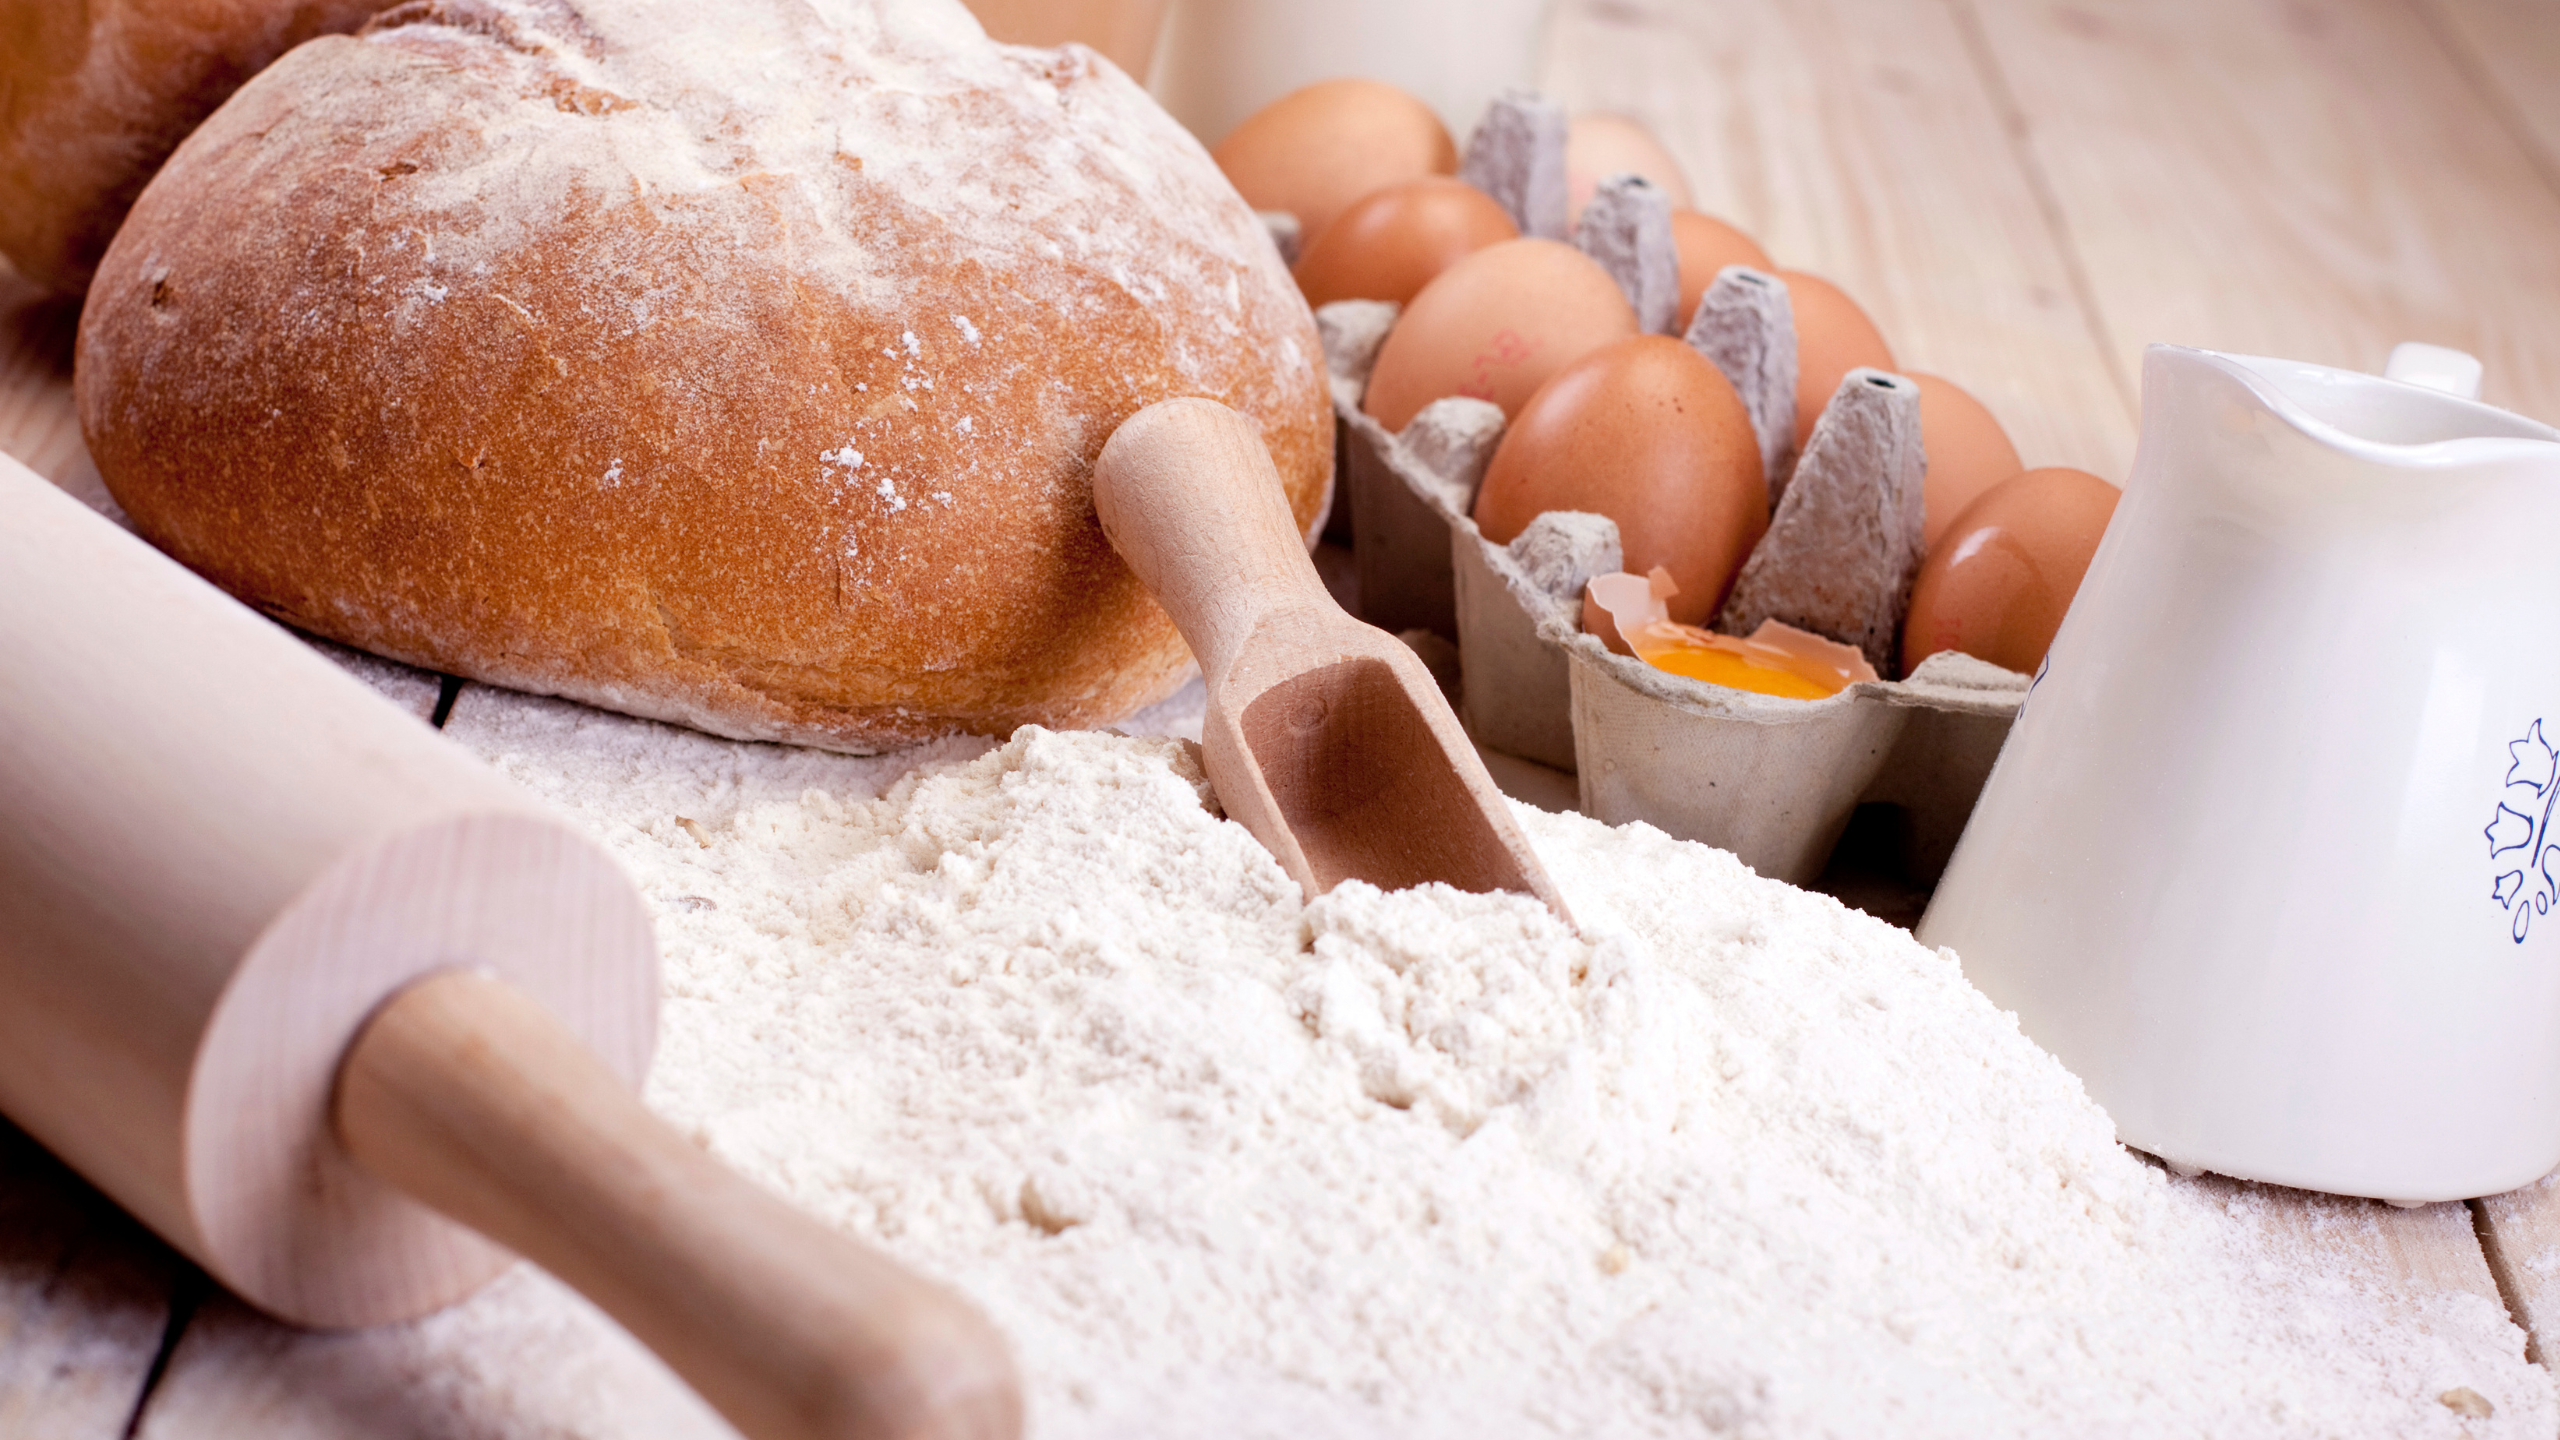 flour, eggs, and rolling pin to make bread